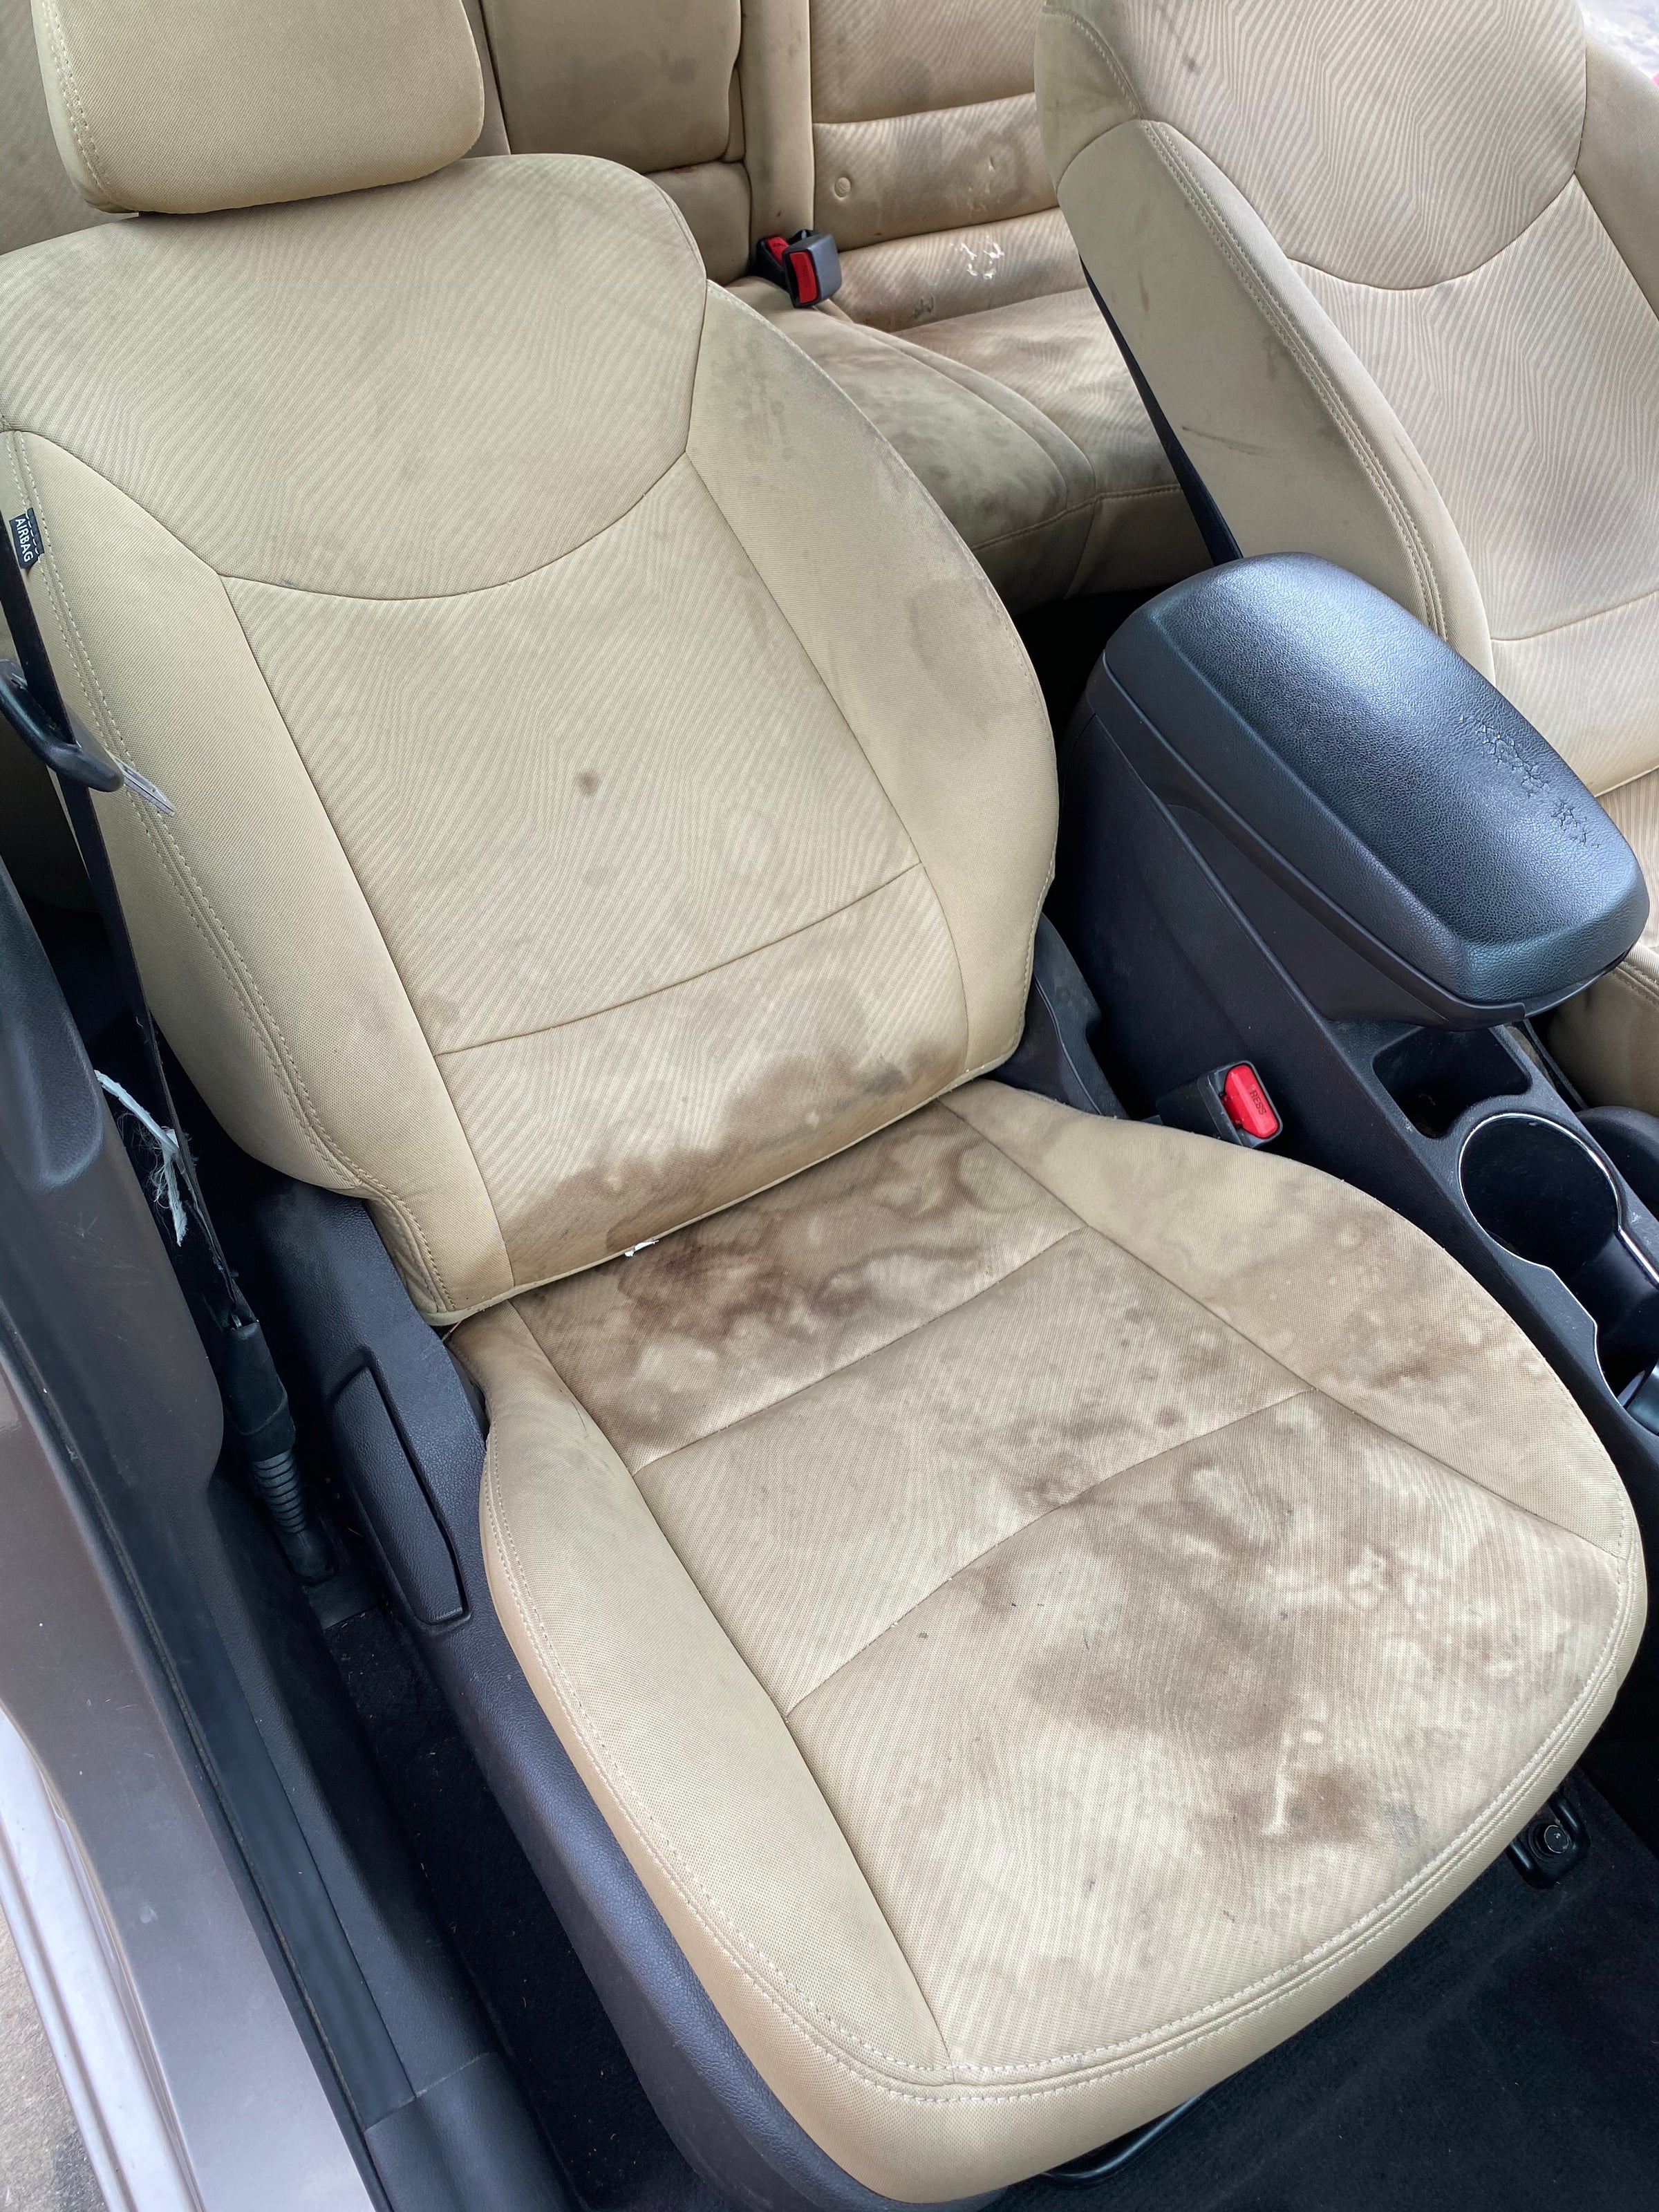 Shampoo, steam cleaning, and extracting upholstery seats